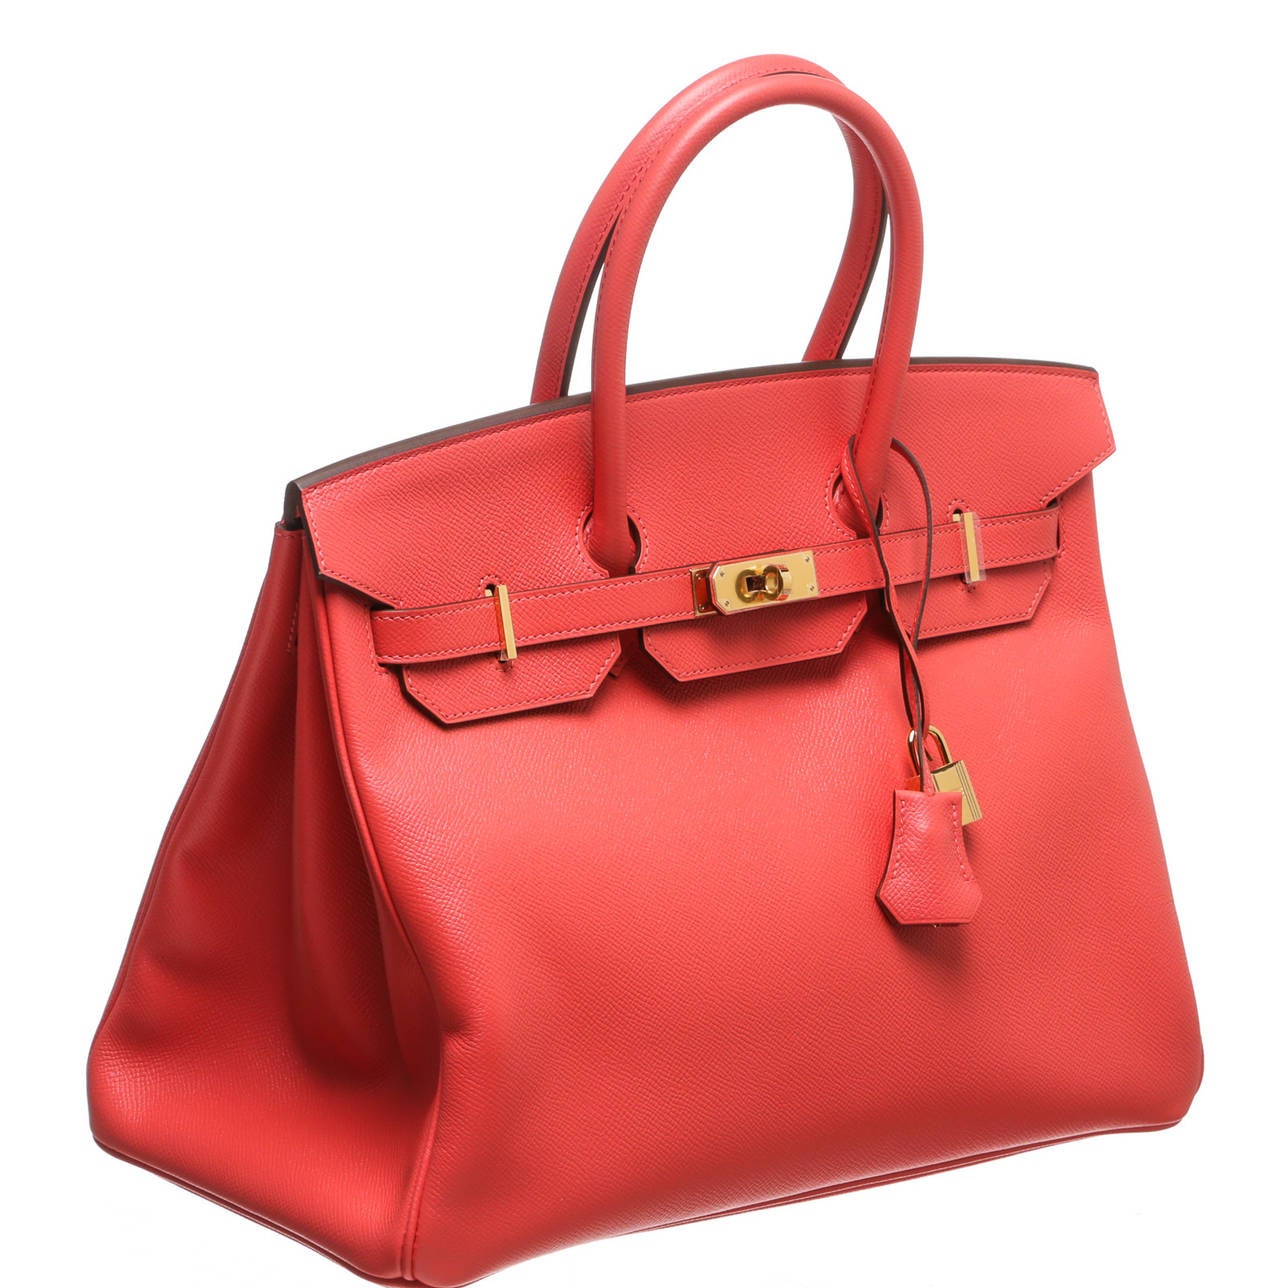 This gorgeous 35cm Birkin has been crafted from Rouge Pivoine epsom leather which is noted for rich texture and durability. This Birkin also features polished gold tone hardware. The interior is lined in luxurious leather in matching color. The